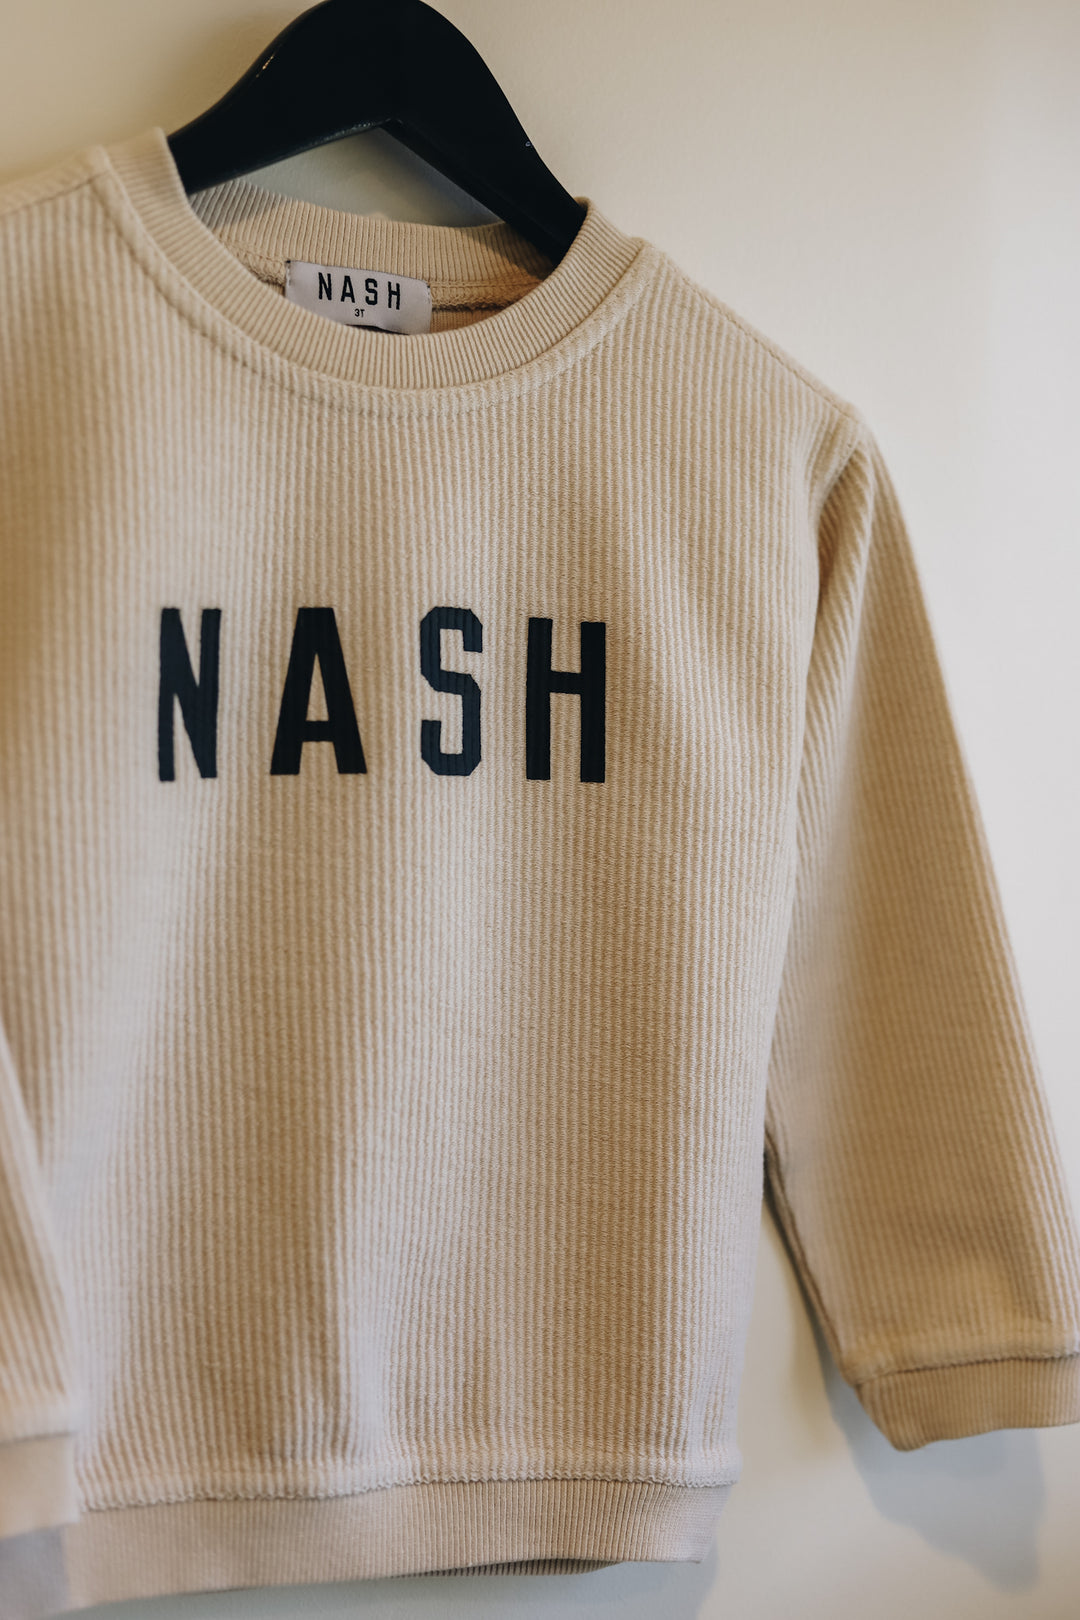 Up close view of the NASH screen printed on the front of kids corded crew